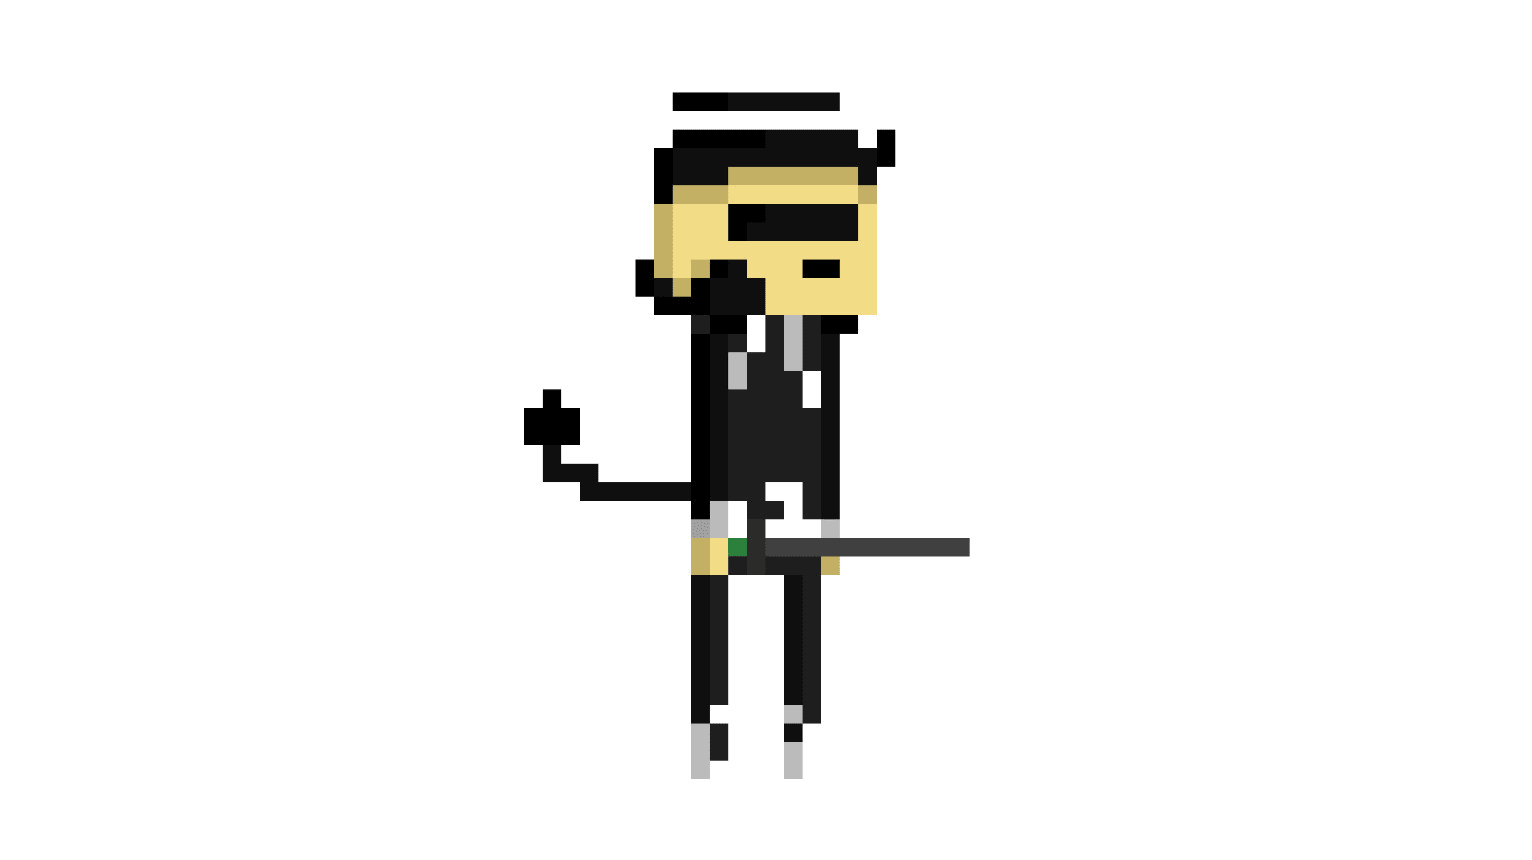 Make A Short Gif Of A Roblox Avatar In Pixel Art By Harrybeest - roblox avatar pixel art